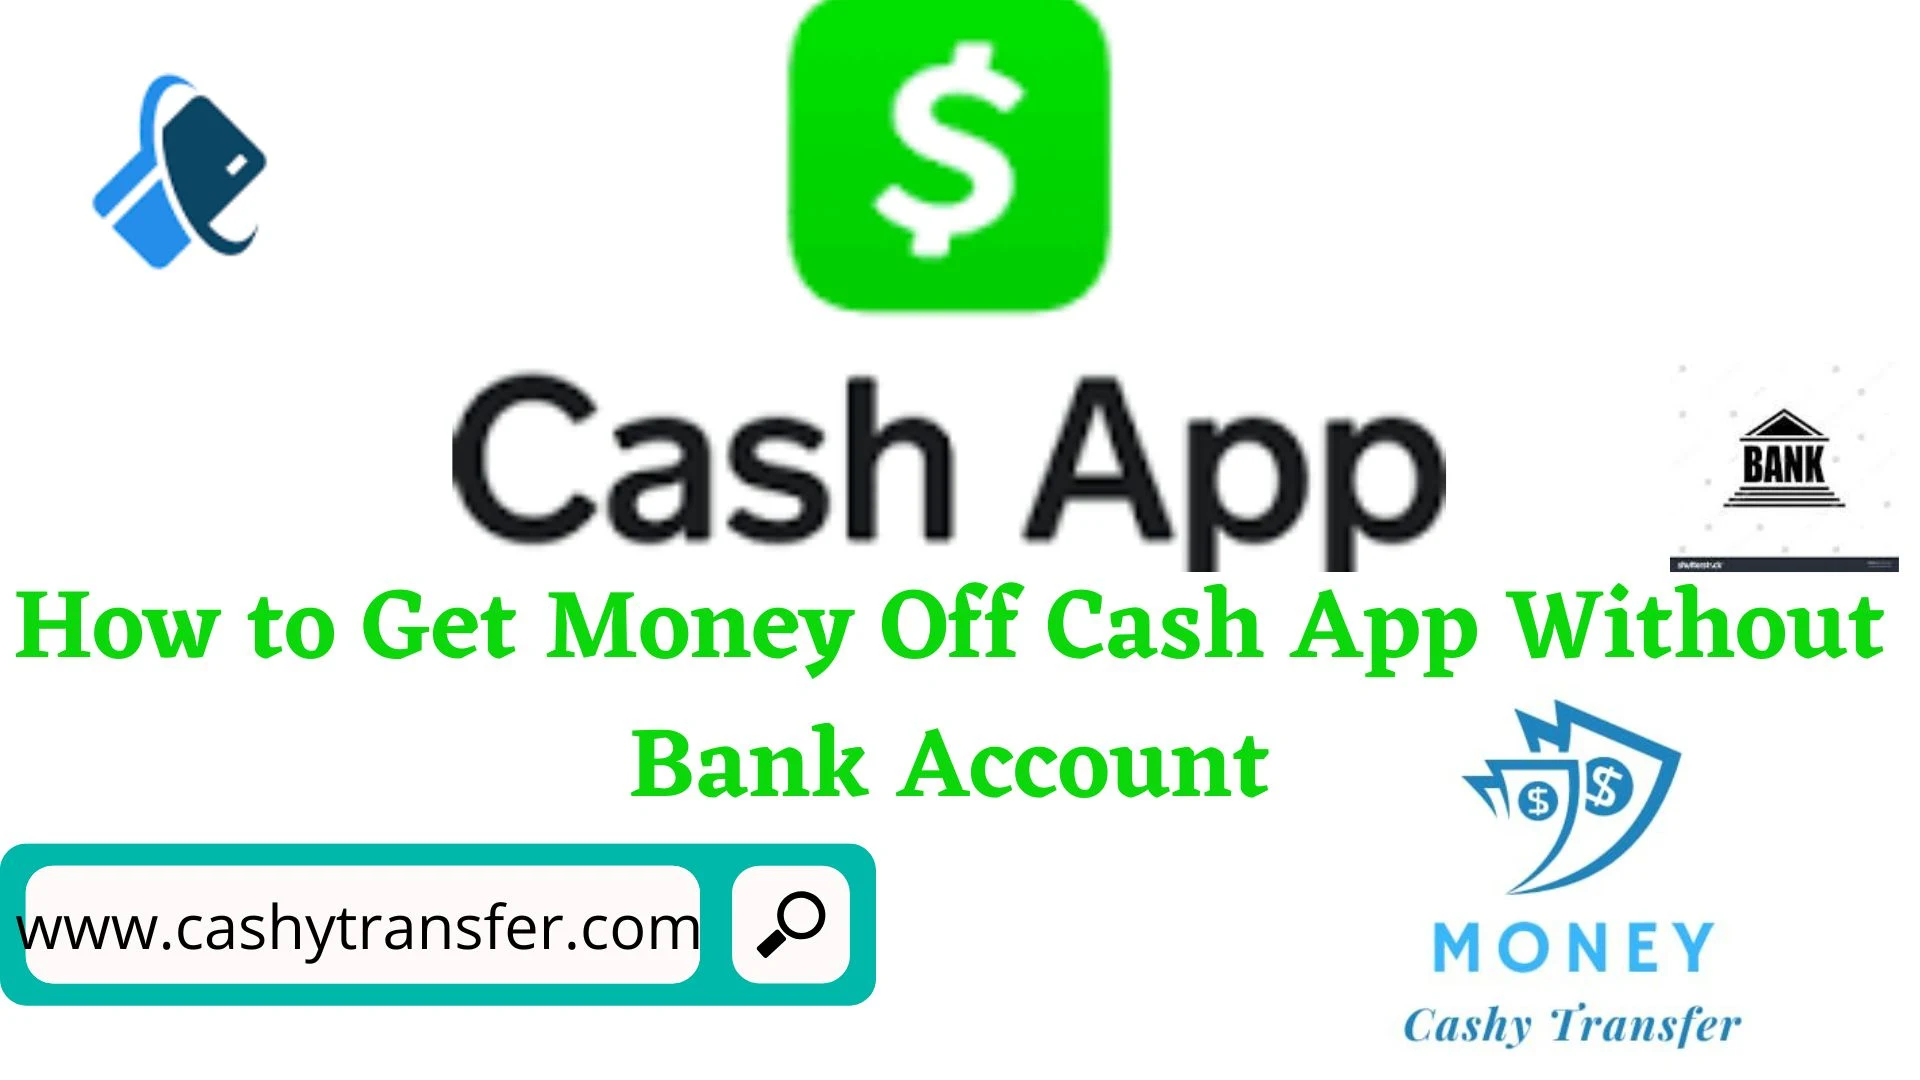 Get Money Off Cash App Without Bank Account